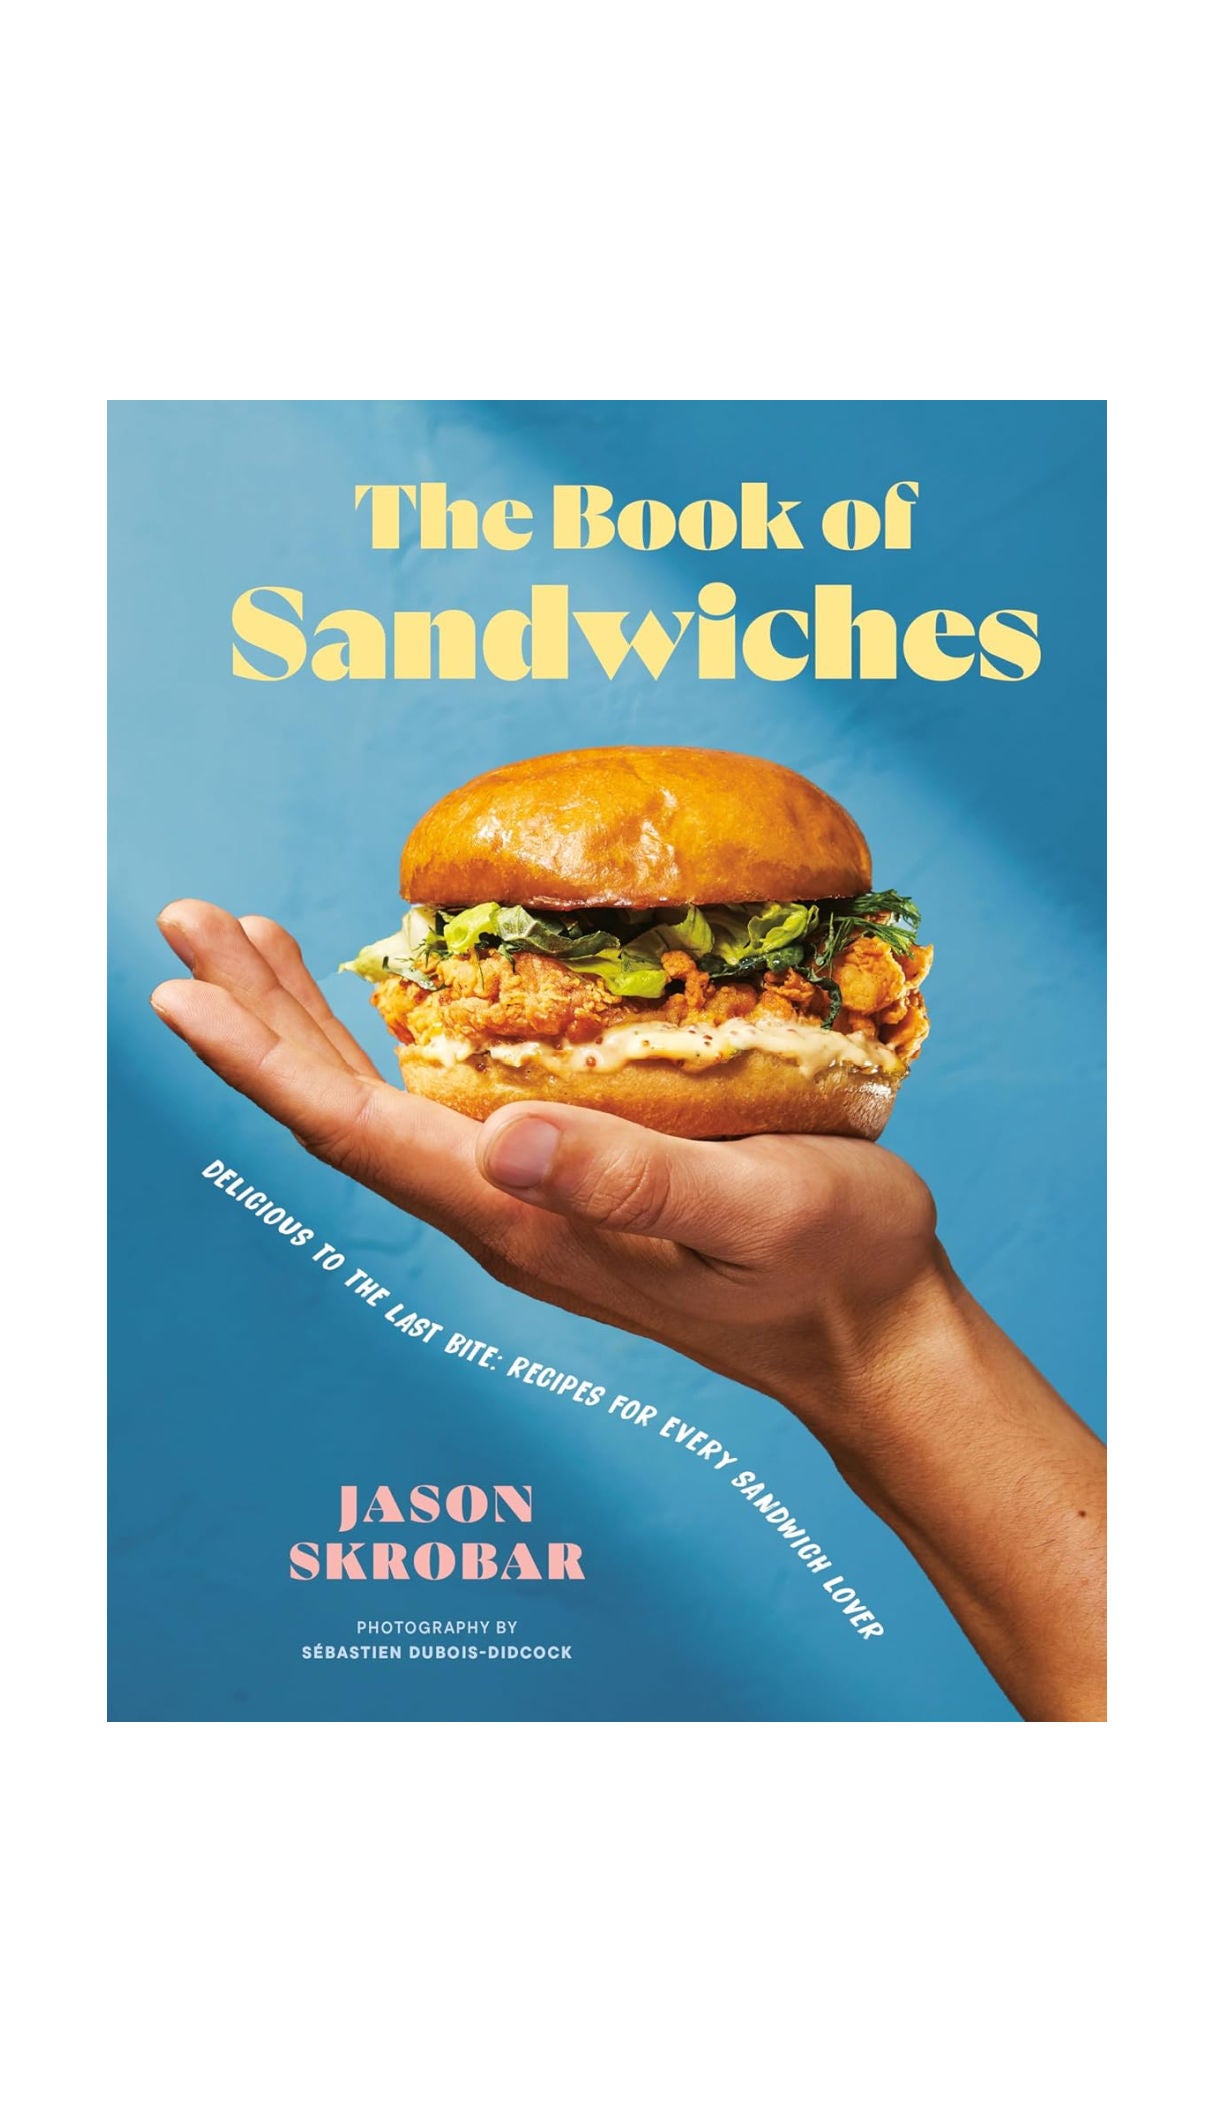 The Book of Sandwiches